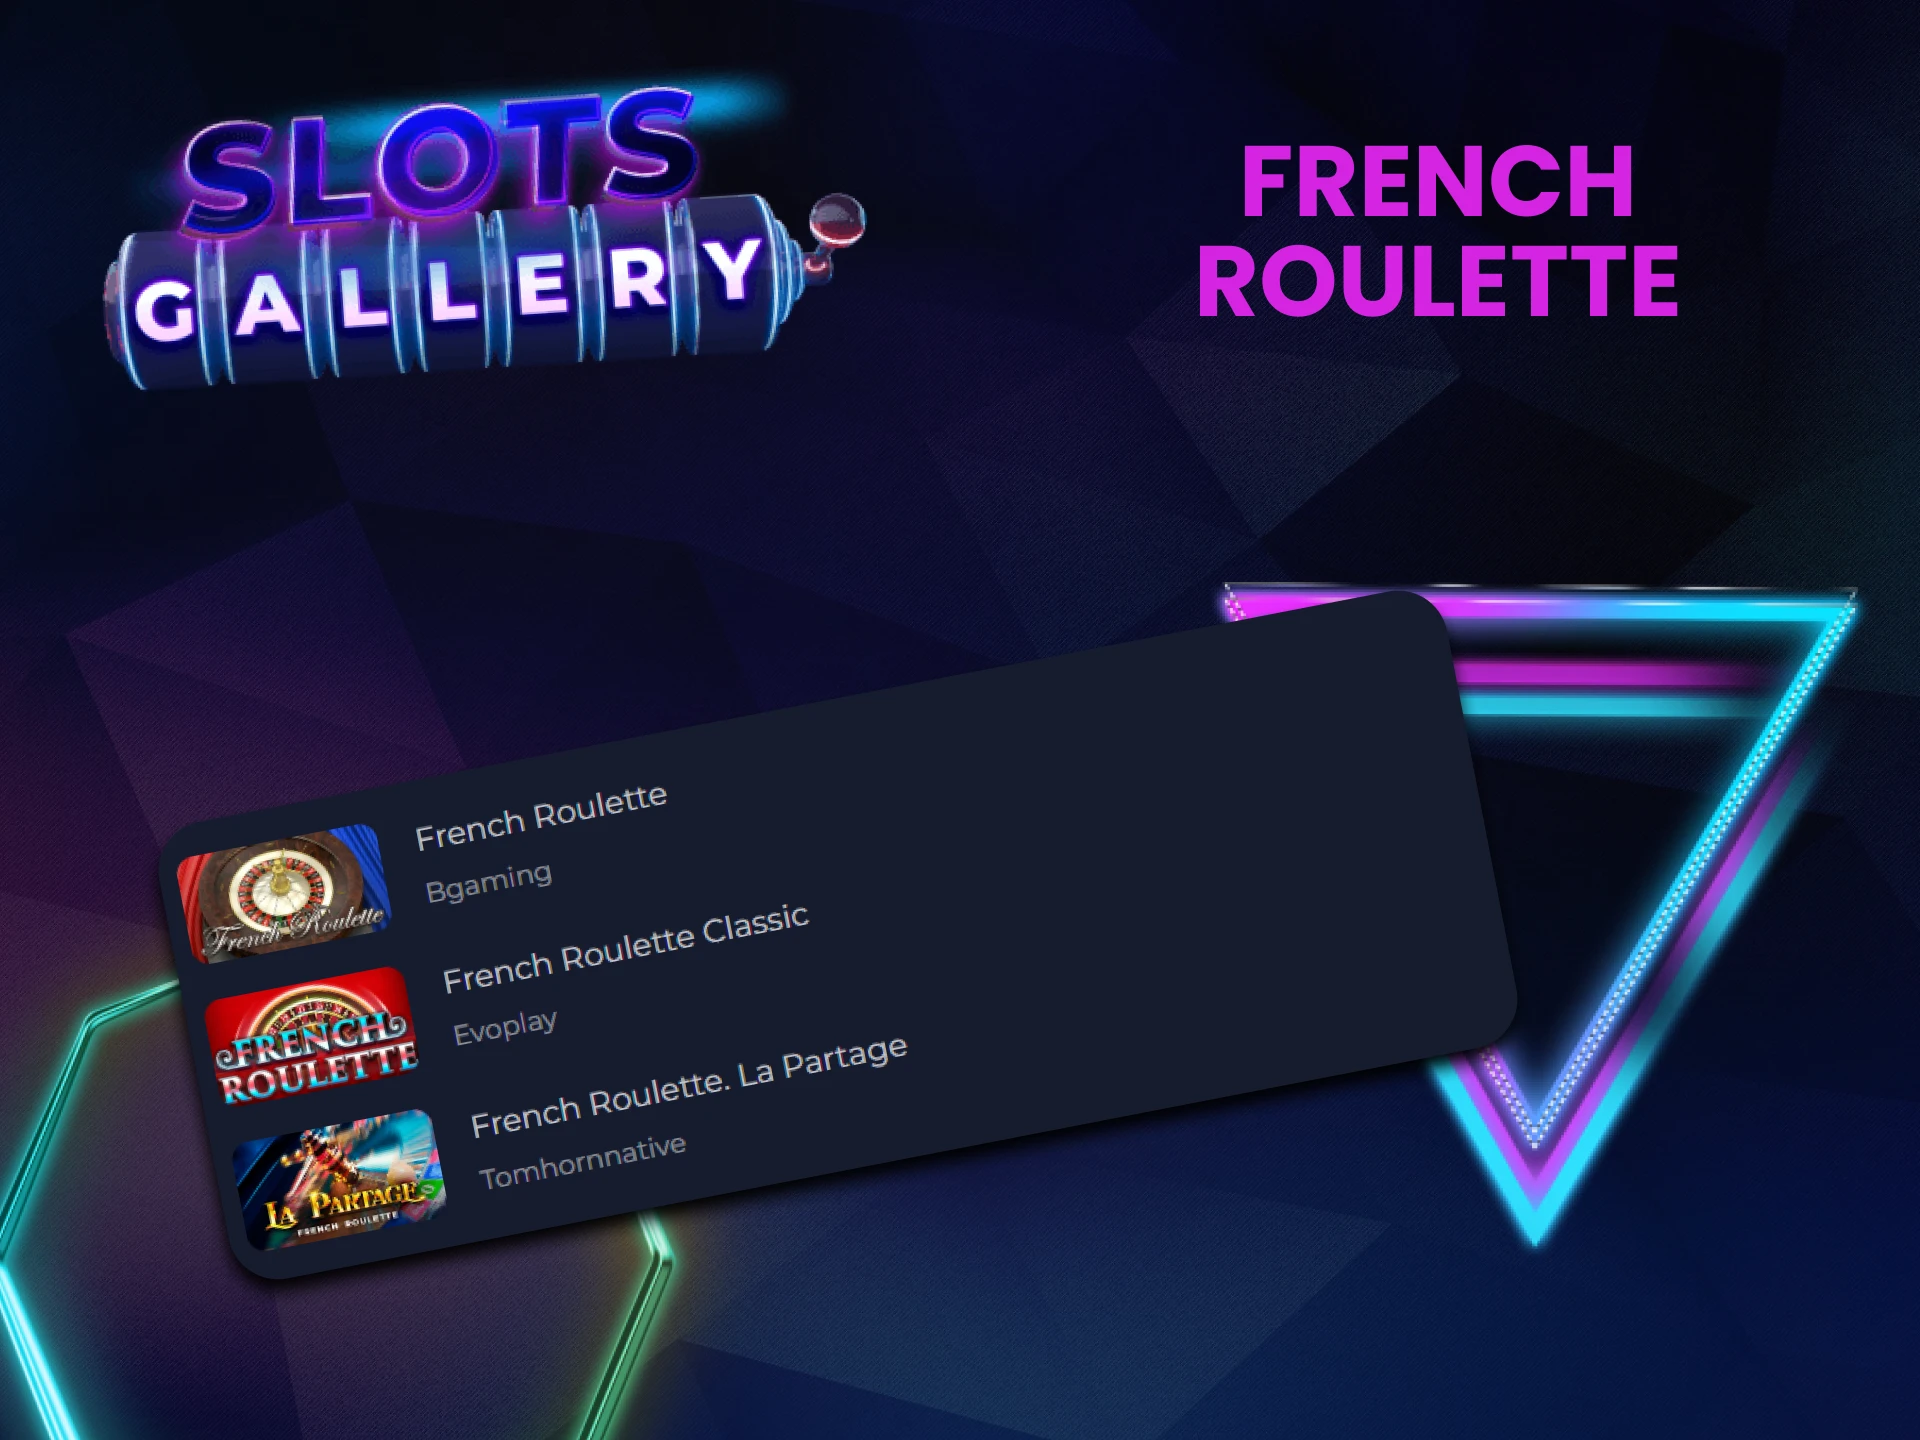 To play roulette at Slots Gallery, choose Franch Roulette.